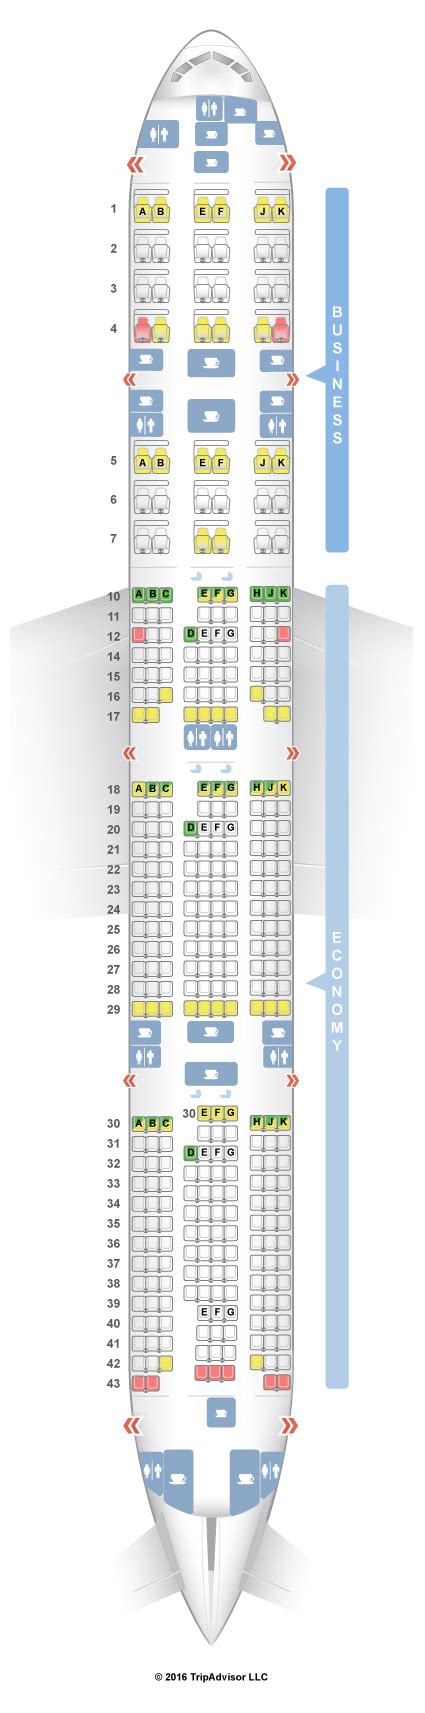 Seat map for qatar airways. For your next Qatar Airways flight, use this seating chart to get the most comfortable seats, legroom, and recline on . Qatar Airways Boeing 777-300ER (77W) Layout 2. Note: There are 4 versions of this aircraft. Seat Map; Info; … 